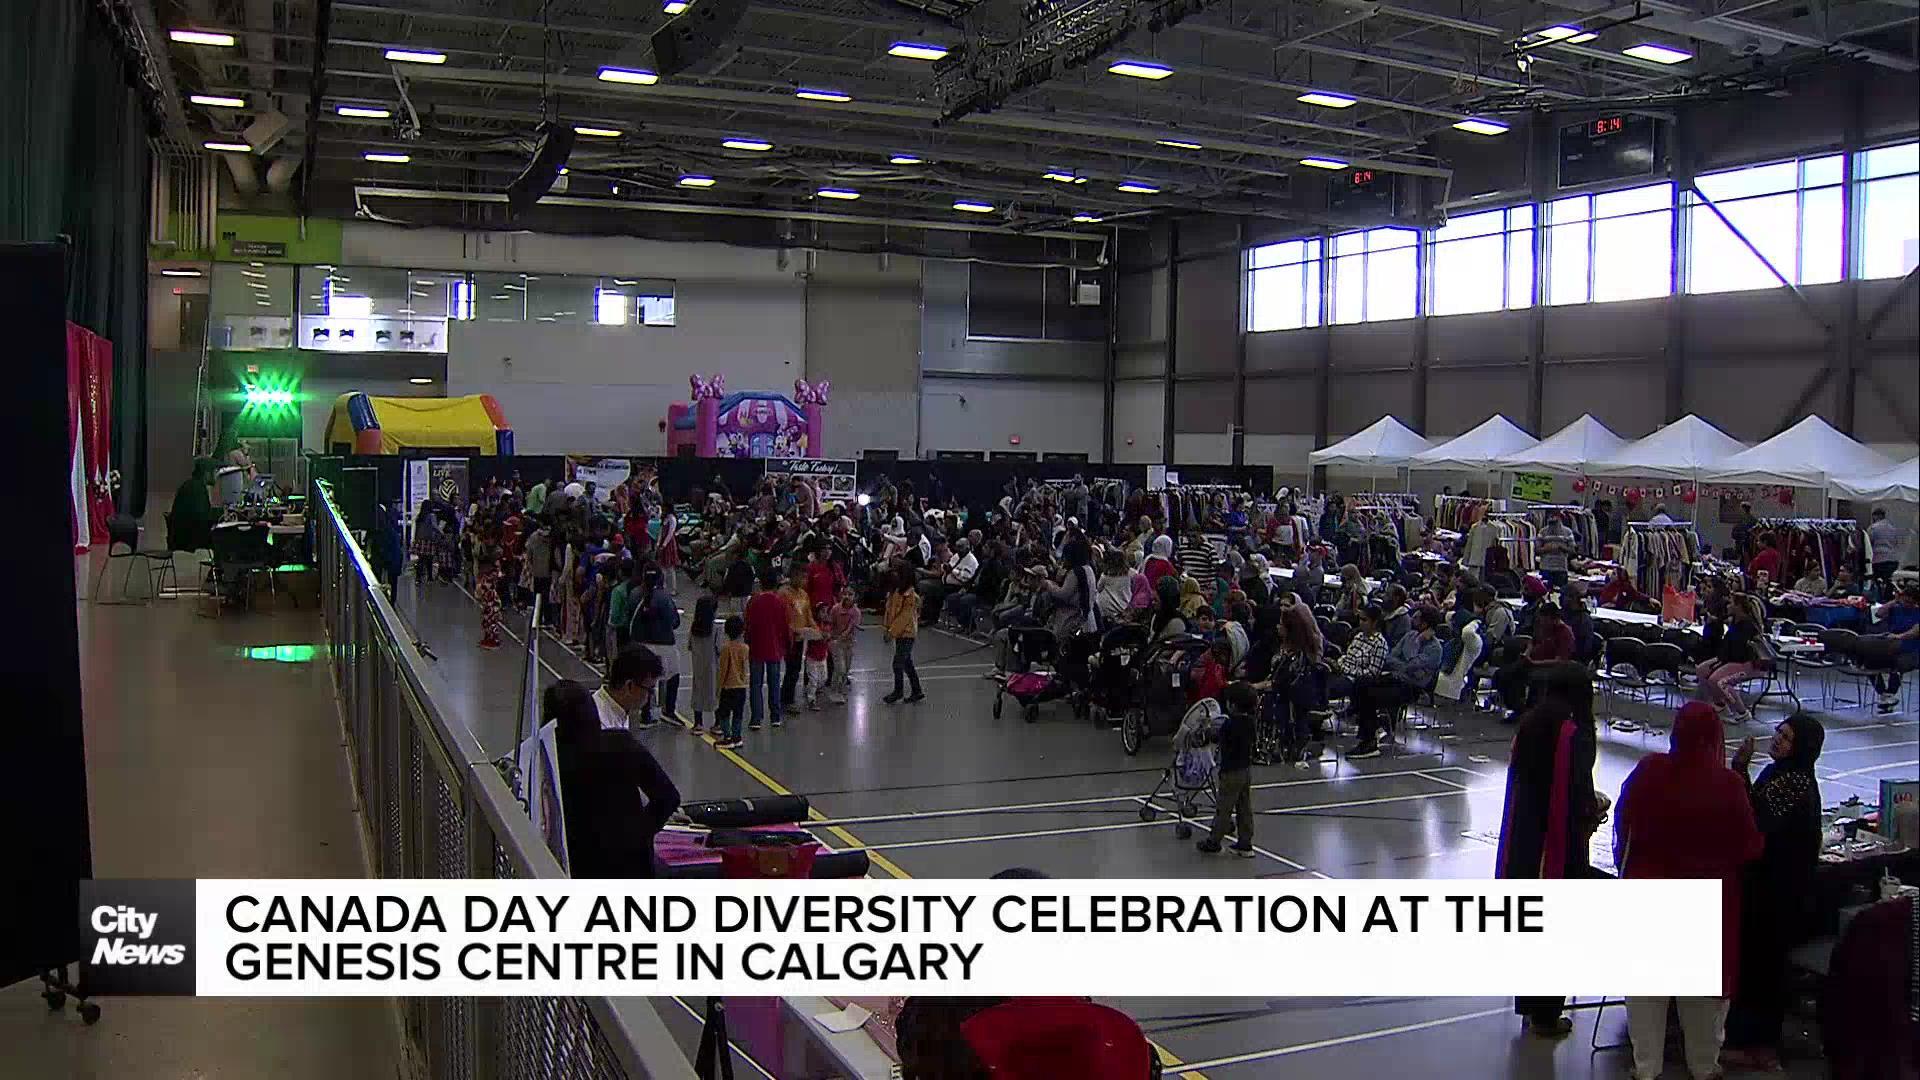 Canada Day Diversity Celebration at the Genesis Center in Calgary